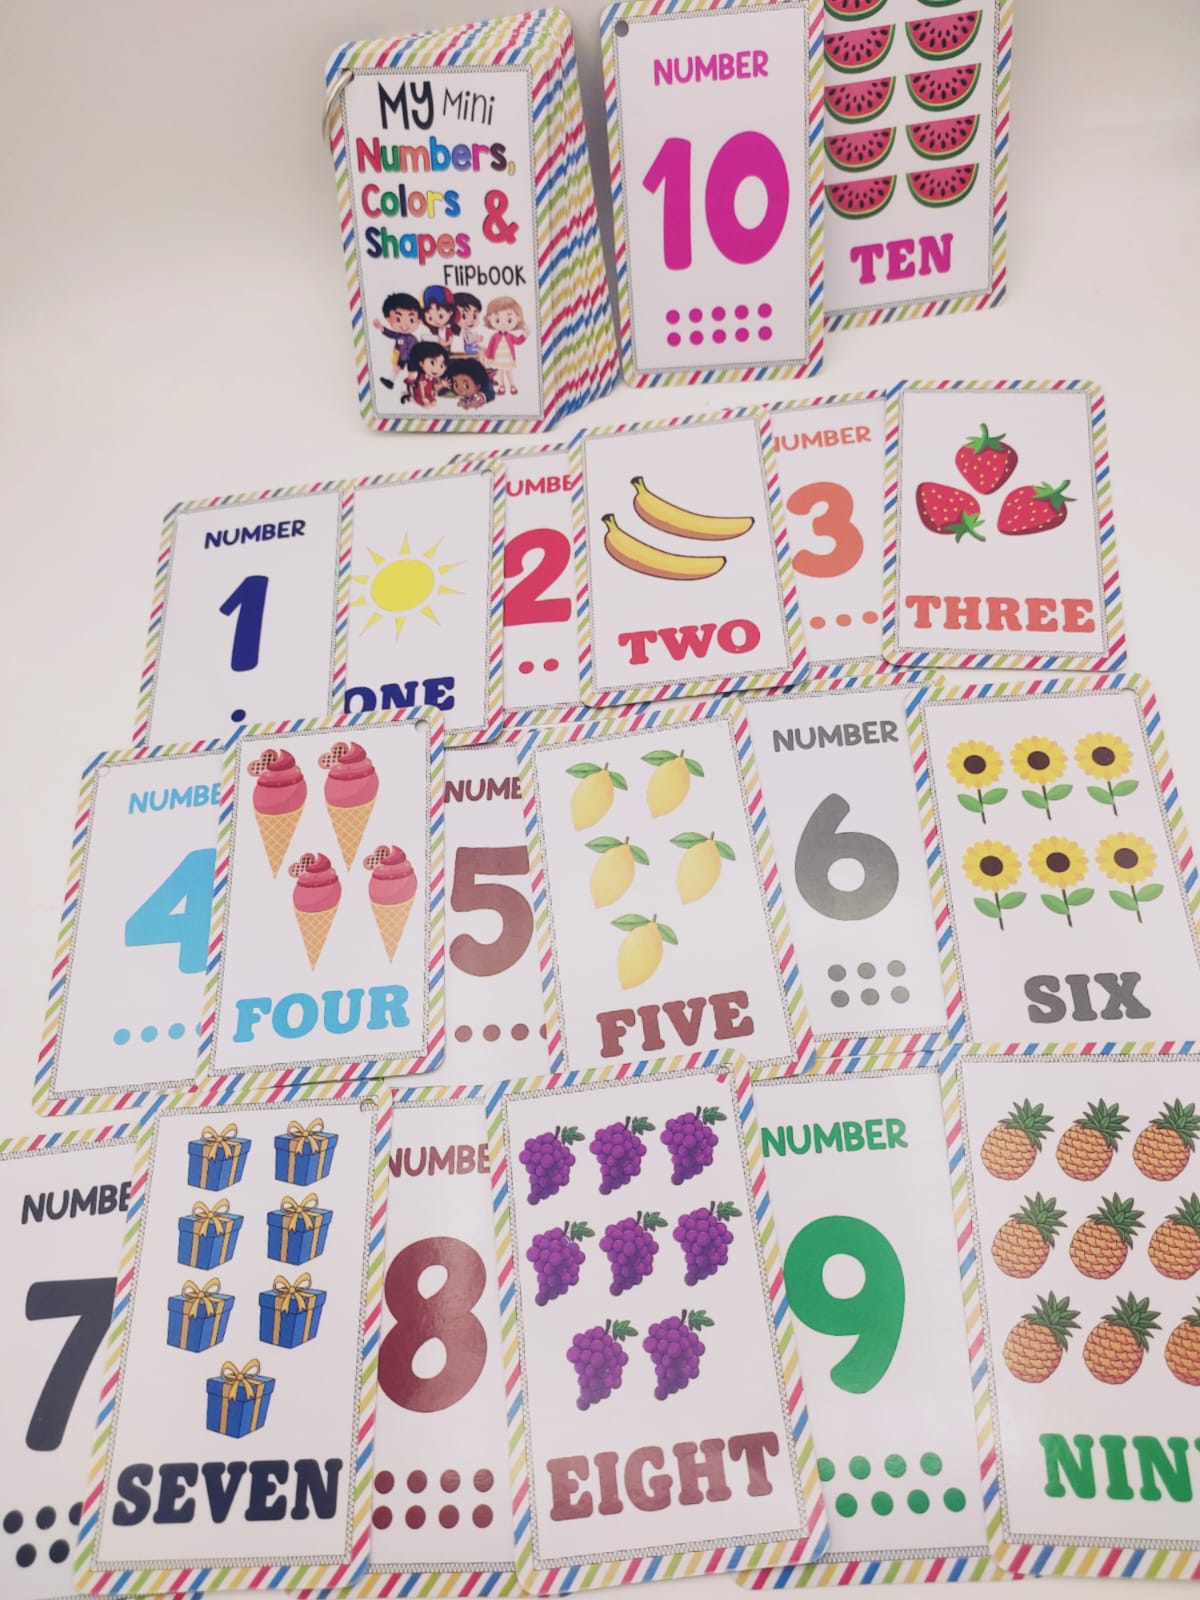 My Mini Numbers, Colors & Shapes Learning Flipbook